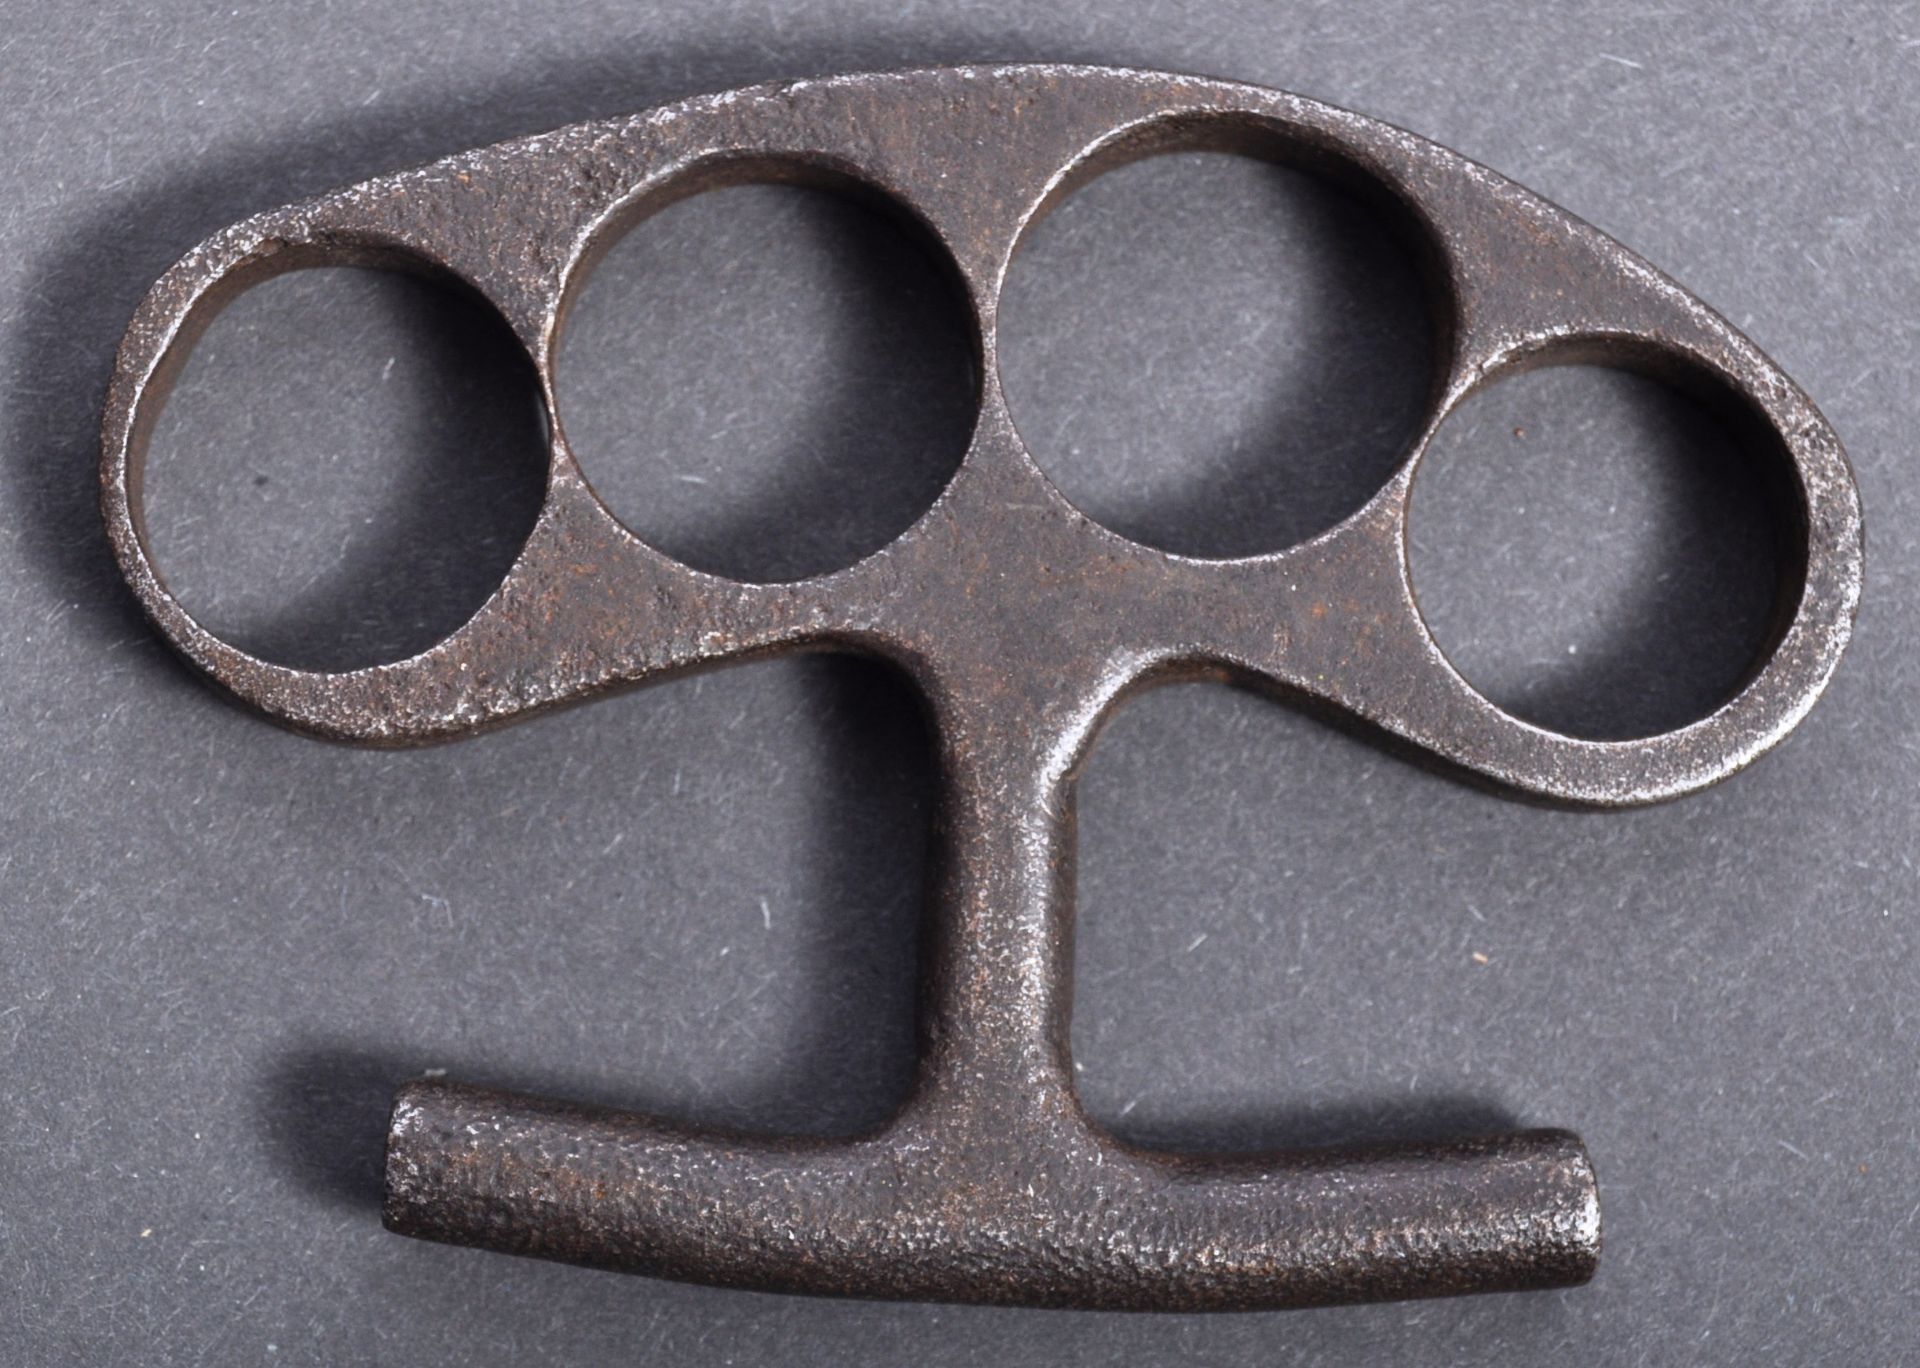 WWI FIRST WORLD WAR KNUCKLE DUSTER / BRASS KNUCKLES - Image 2 of 2